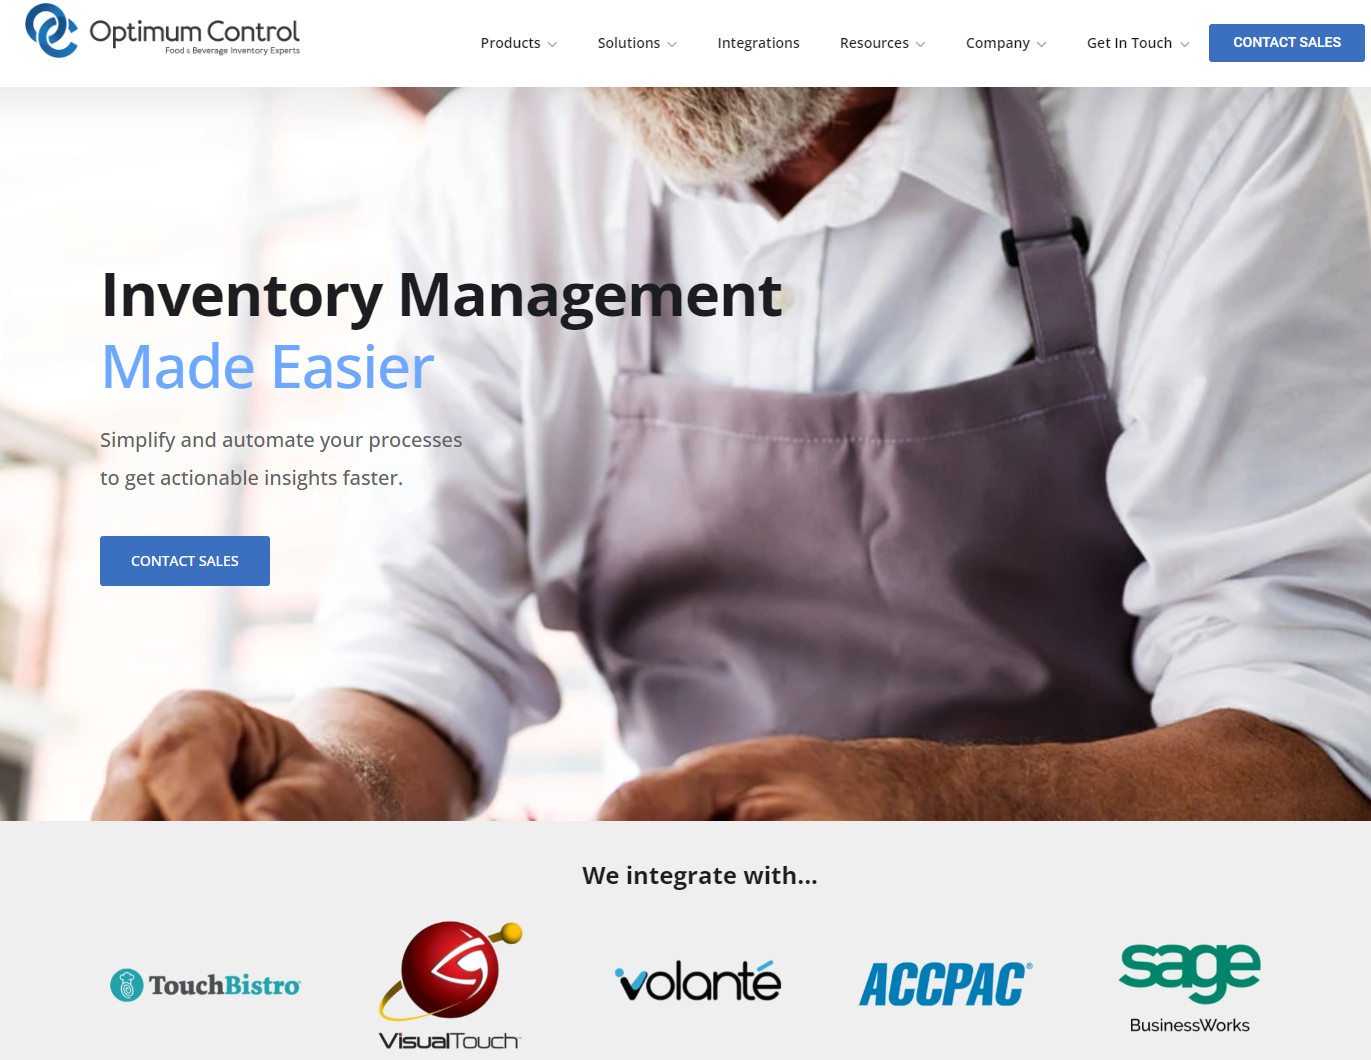 Optimum Control is one of the more advanced kitchen inventory software systems